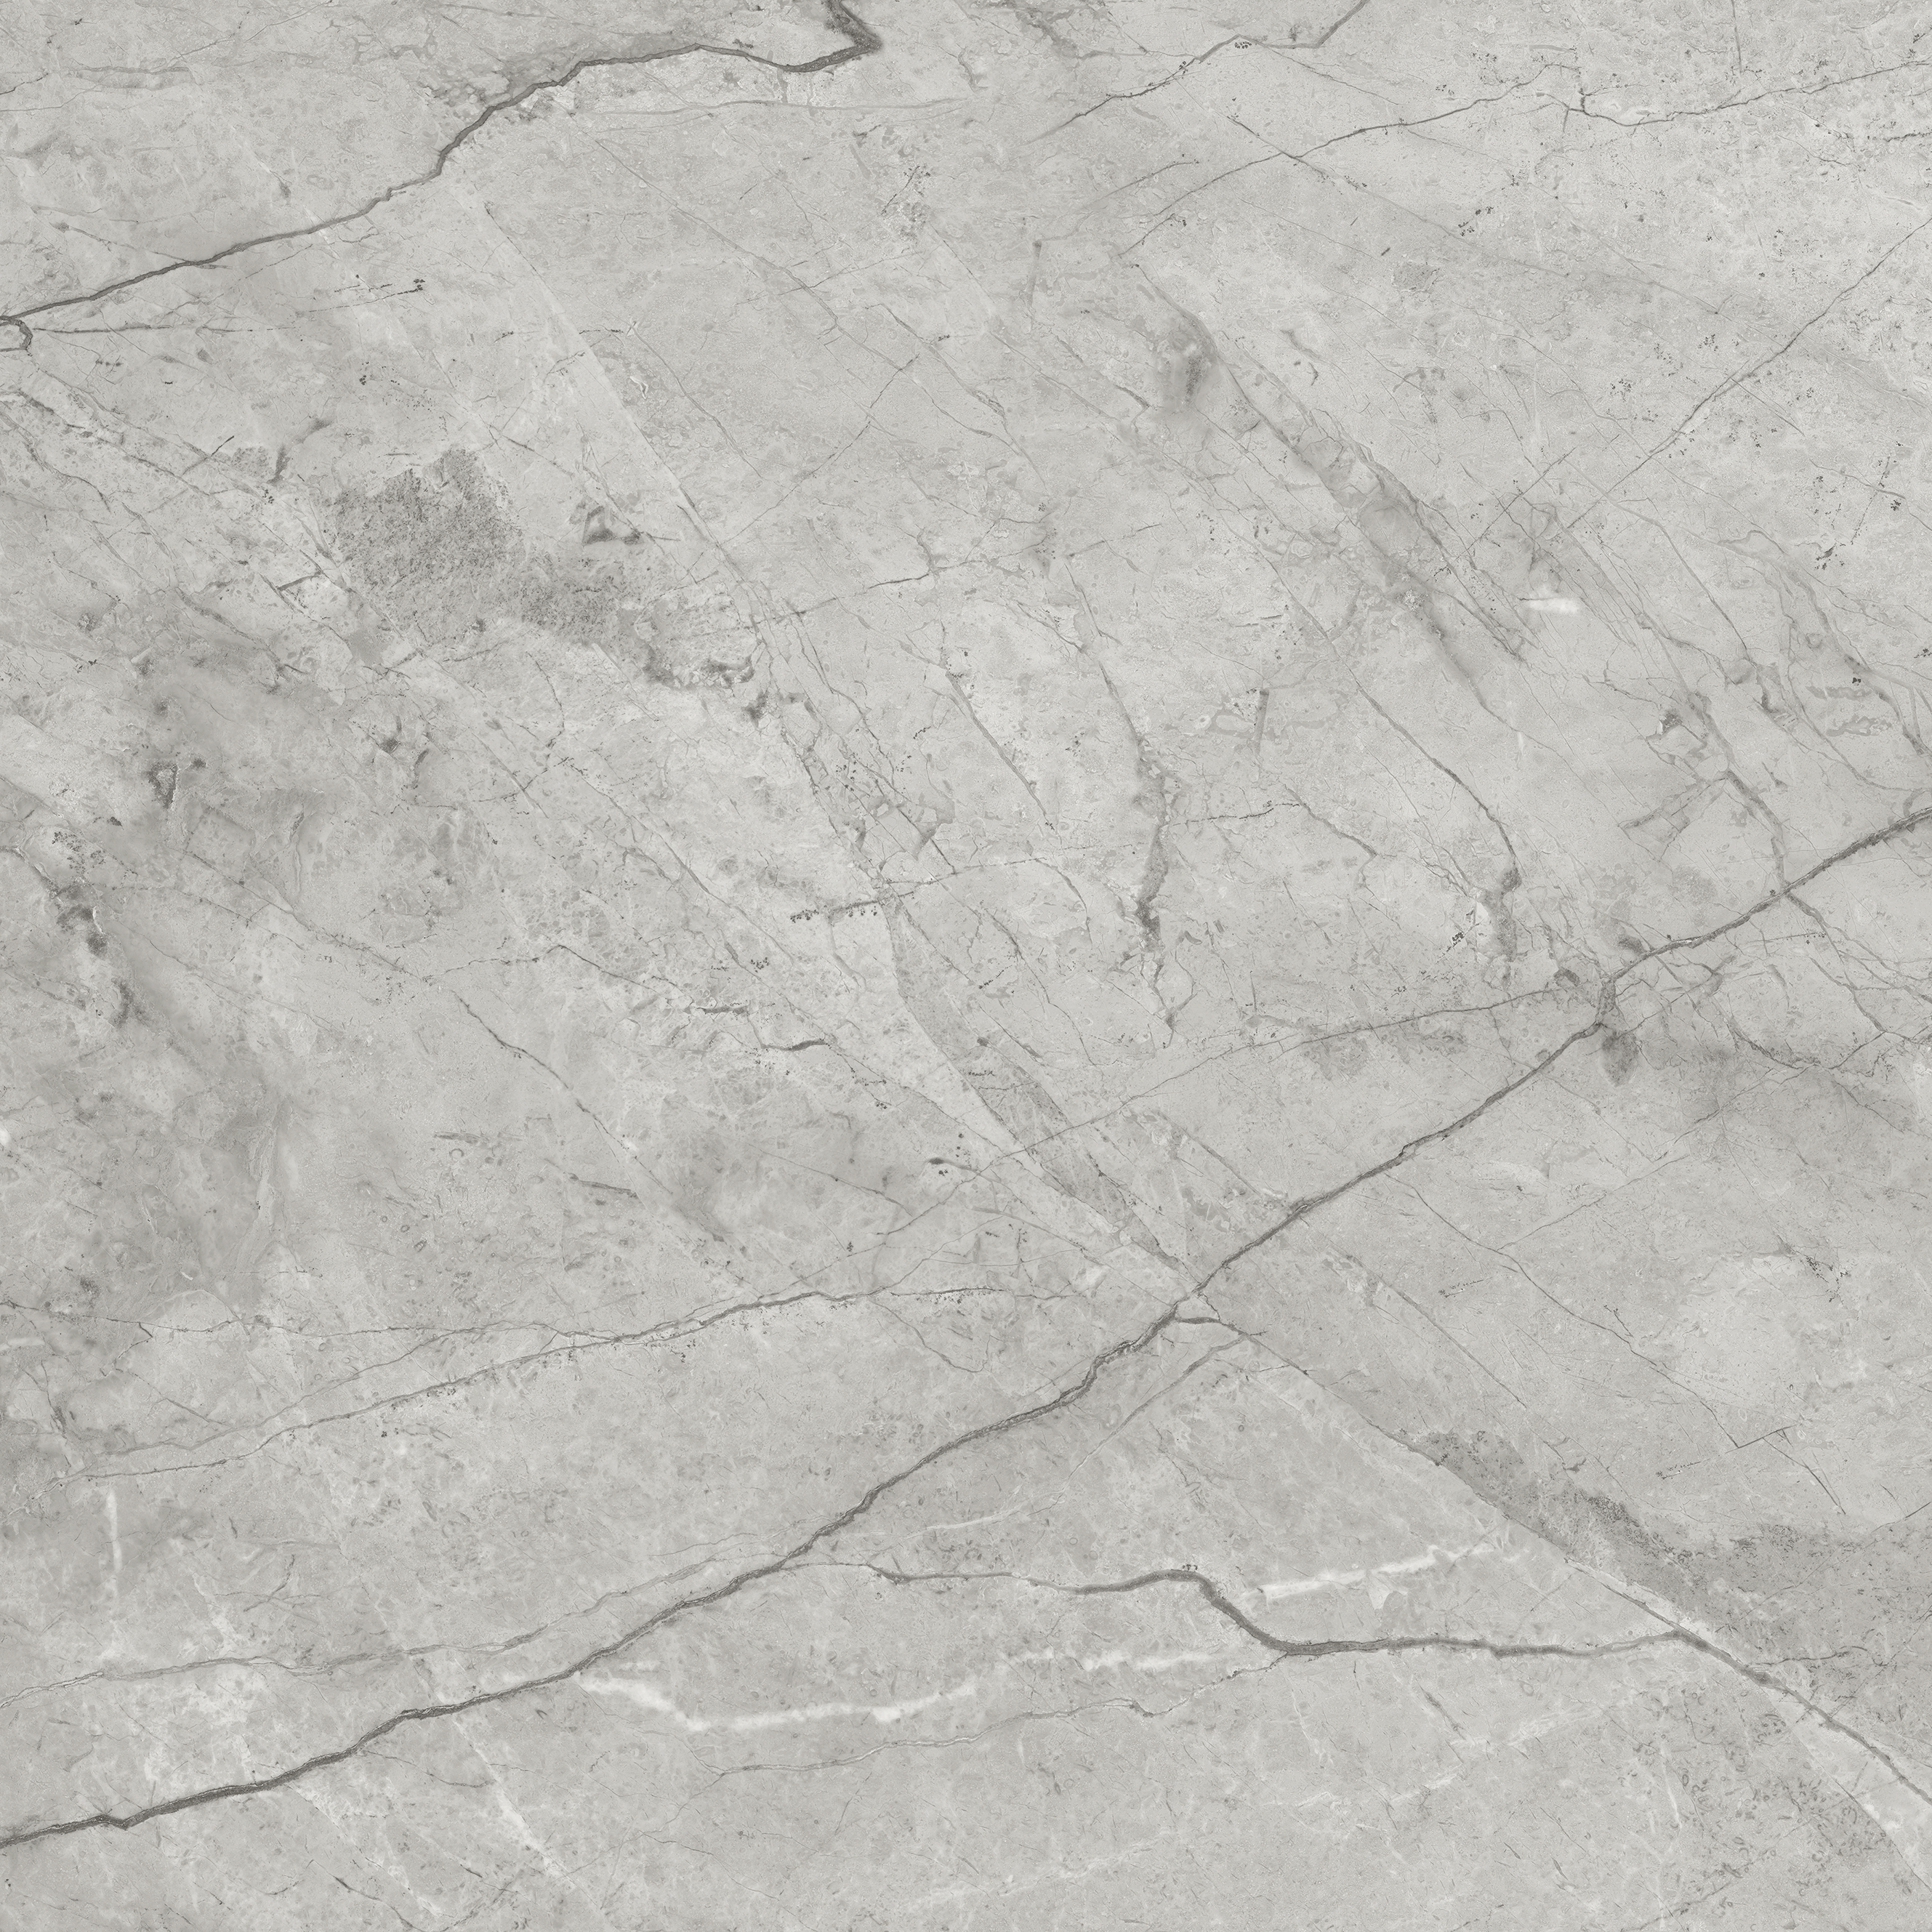 paradiso argento pattern glazed porcelain field tile from la marca anatolia collection distributed by surface group international polished finish rectified edge 24x24 square shape